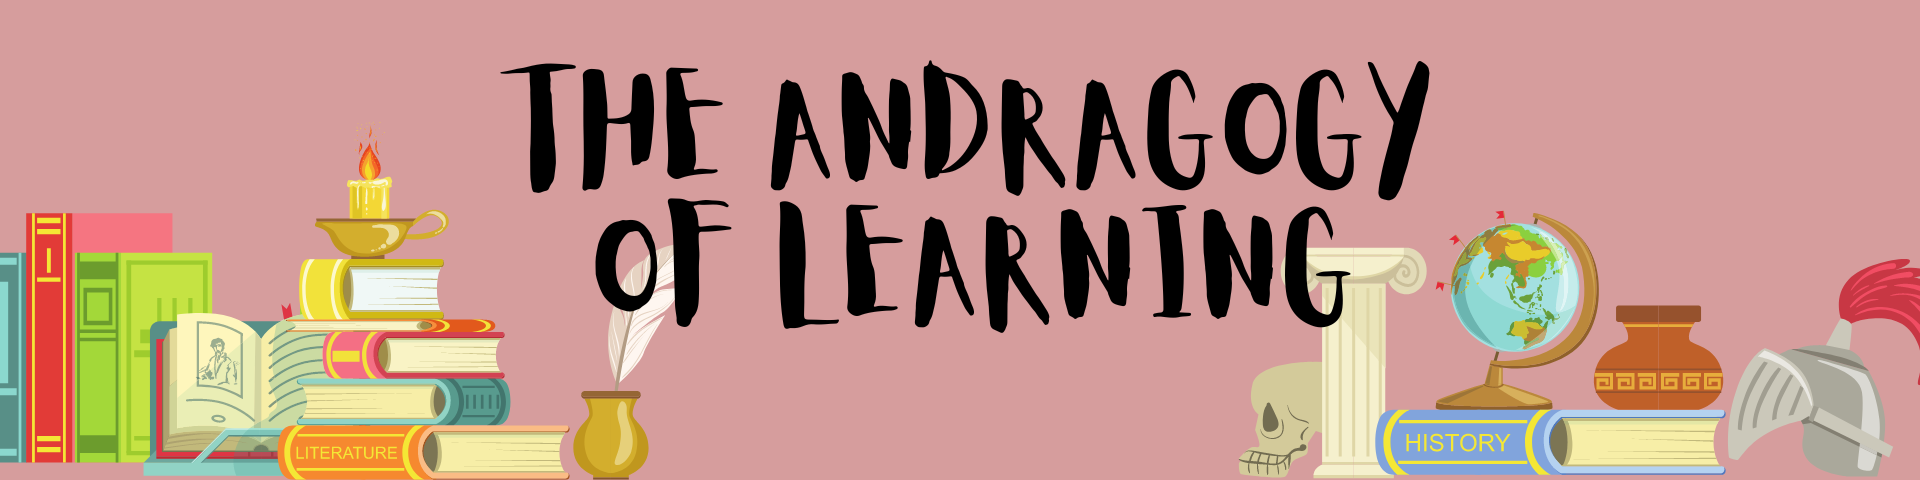 The Andragogy of Learning